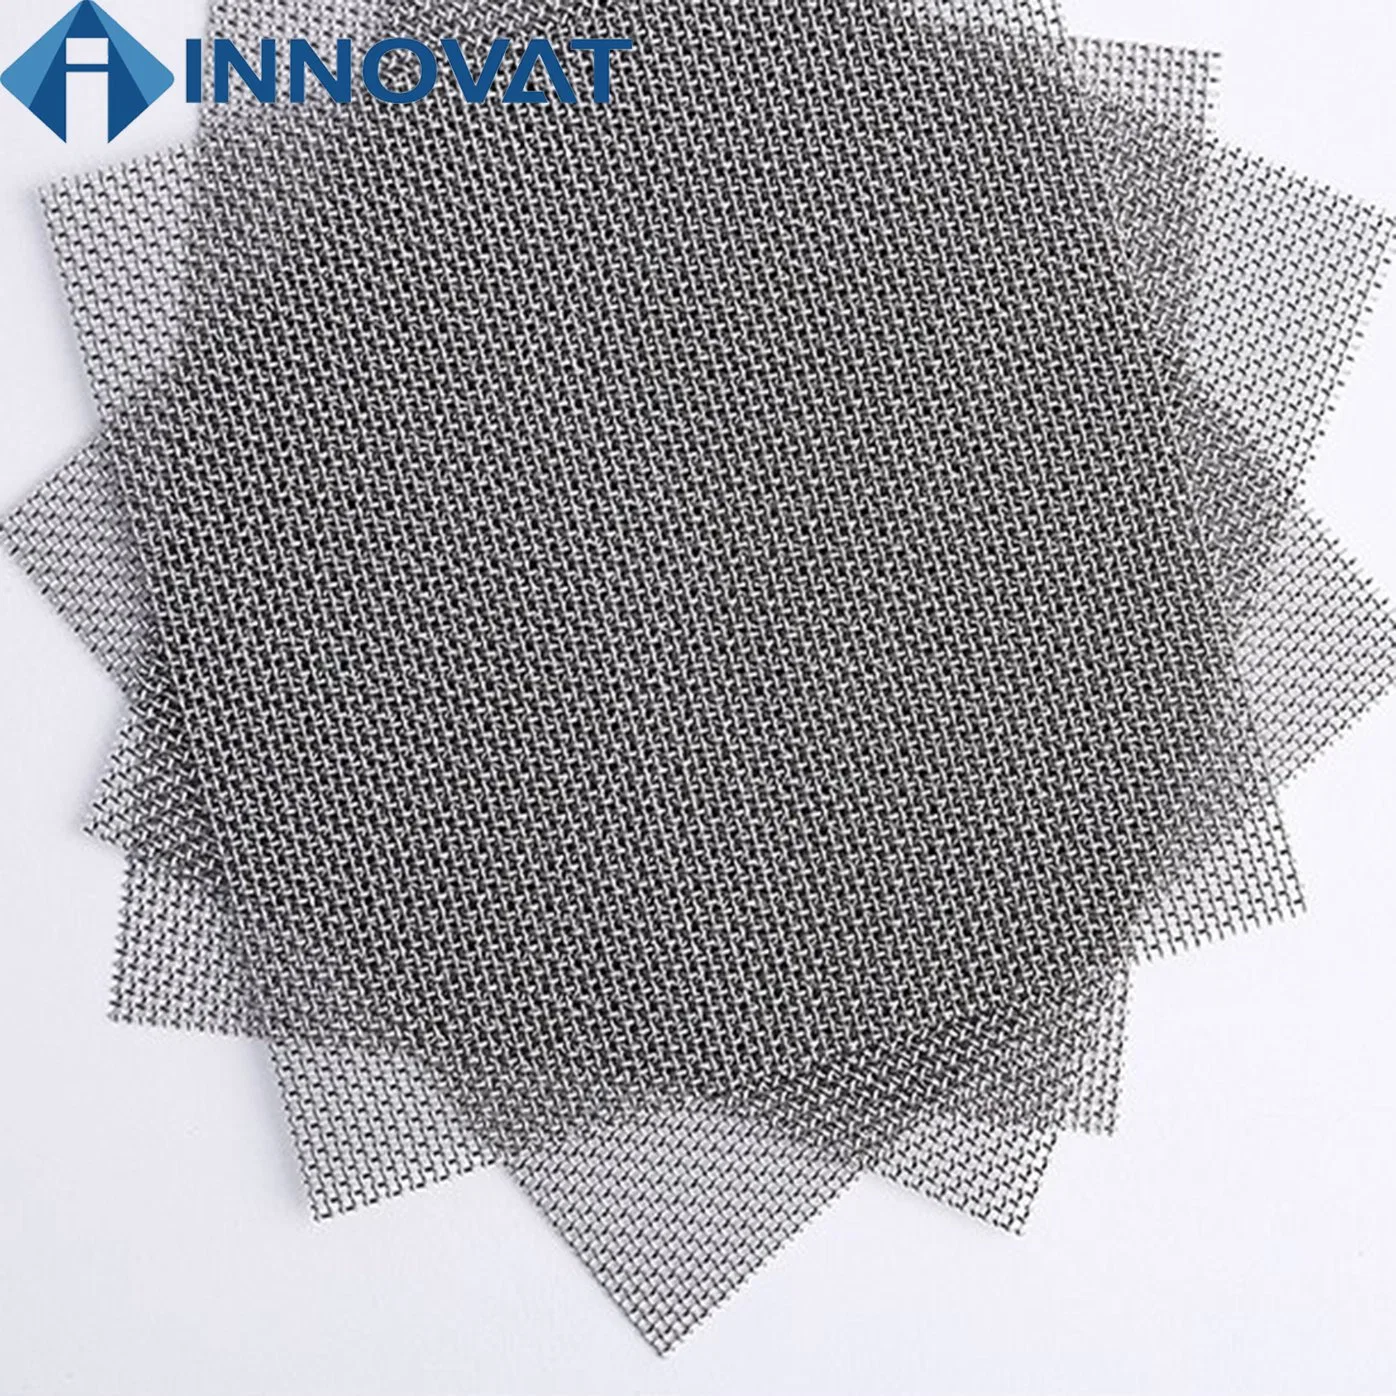 Ss Wire Netting Cloth Ss 304 Insect Net Mosquito Window Screen High Temperature Plain Weave Security Mesh Stainless Steel Wire Cloth Woven 140 150 Micron